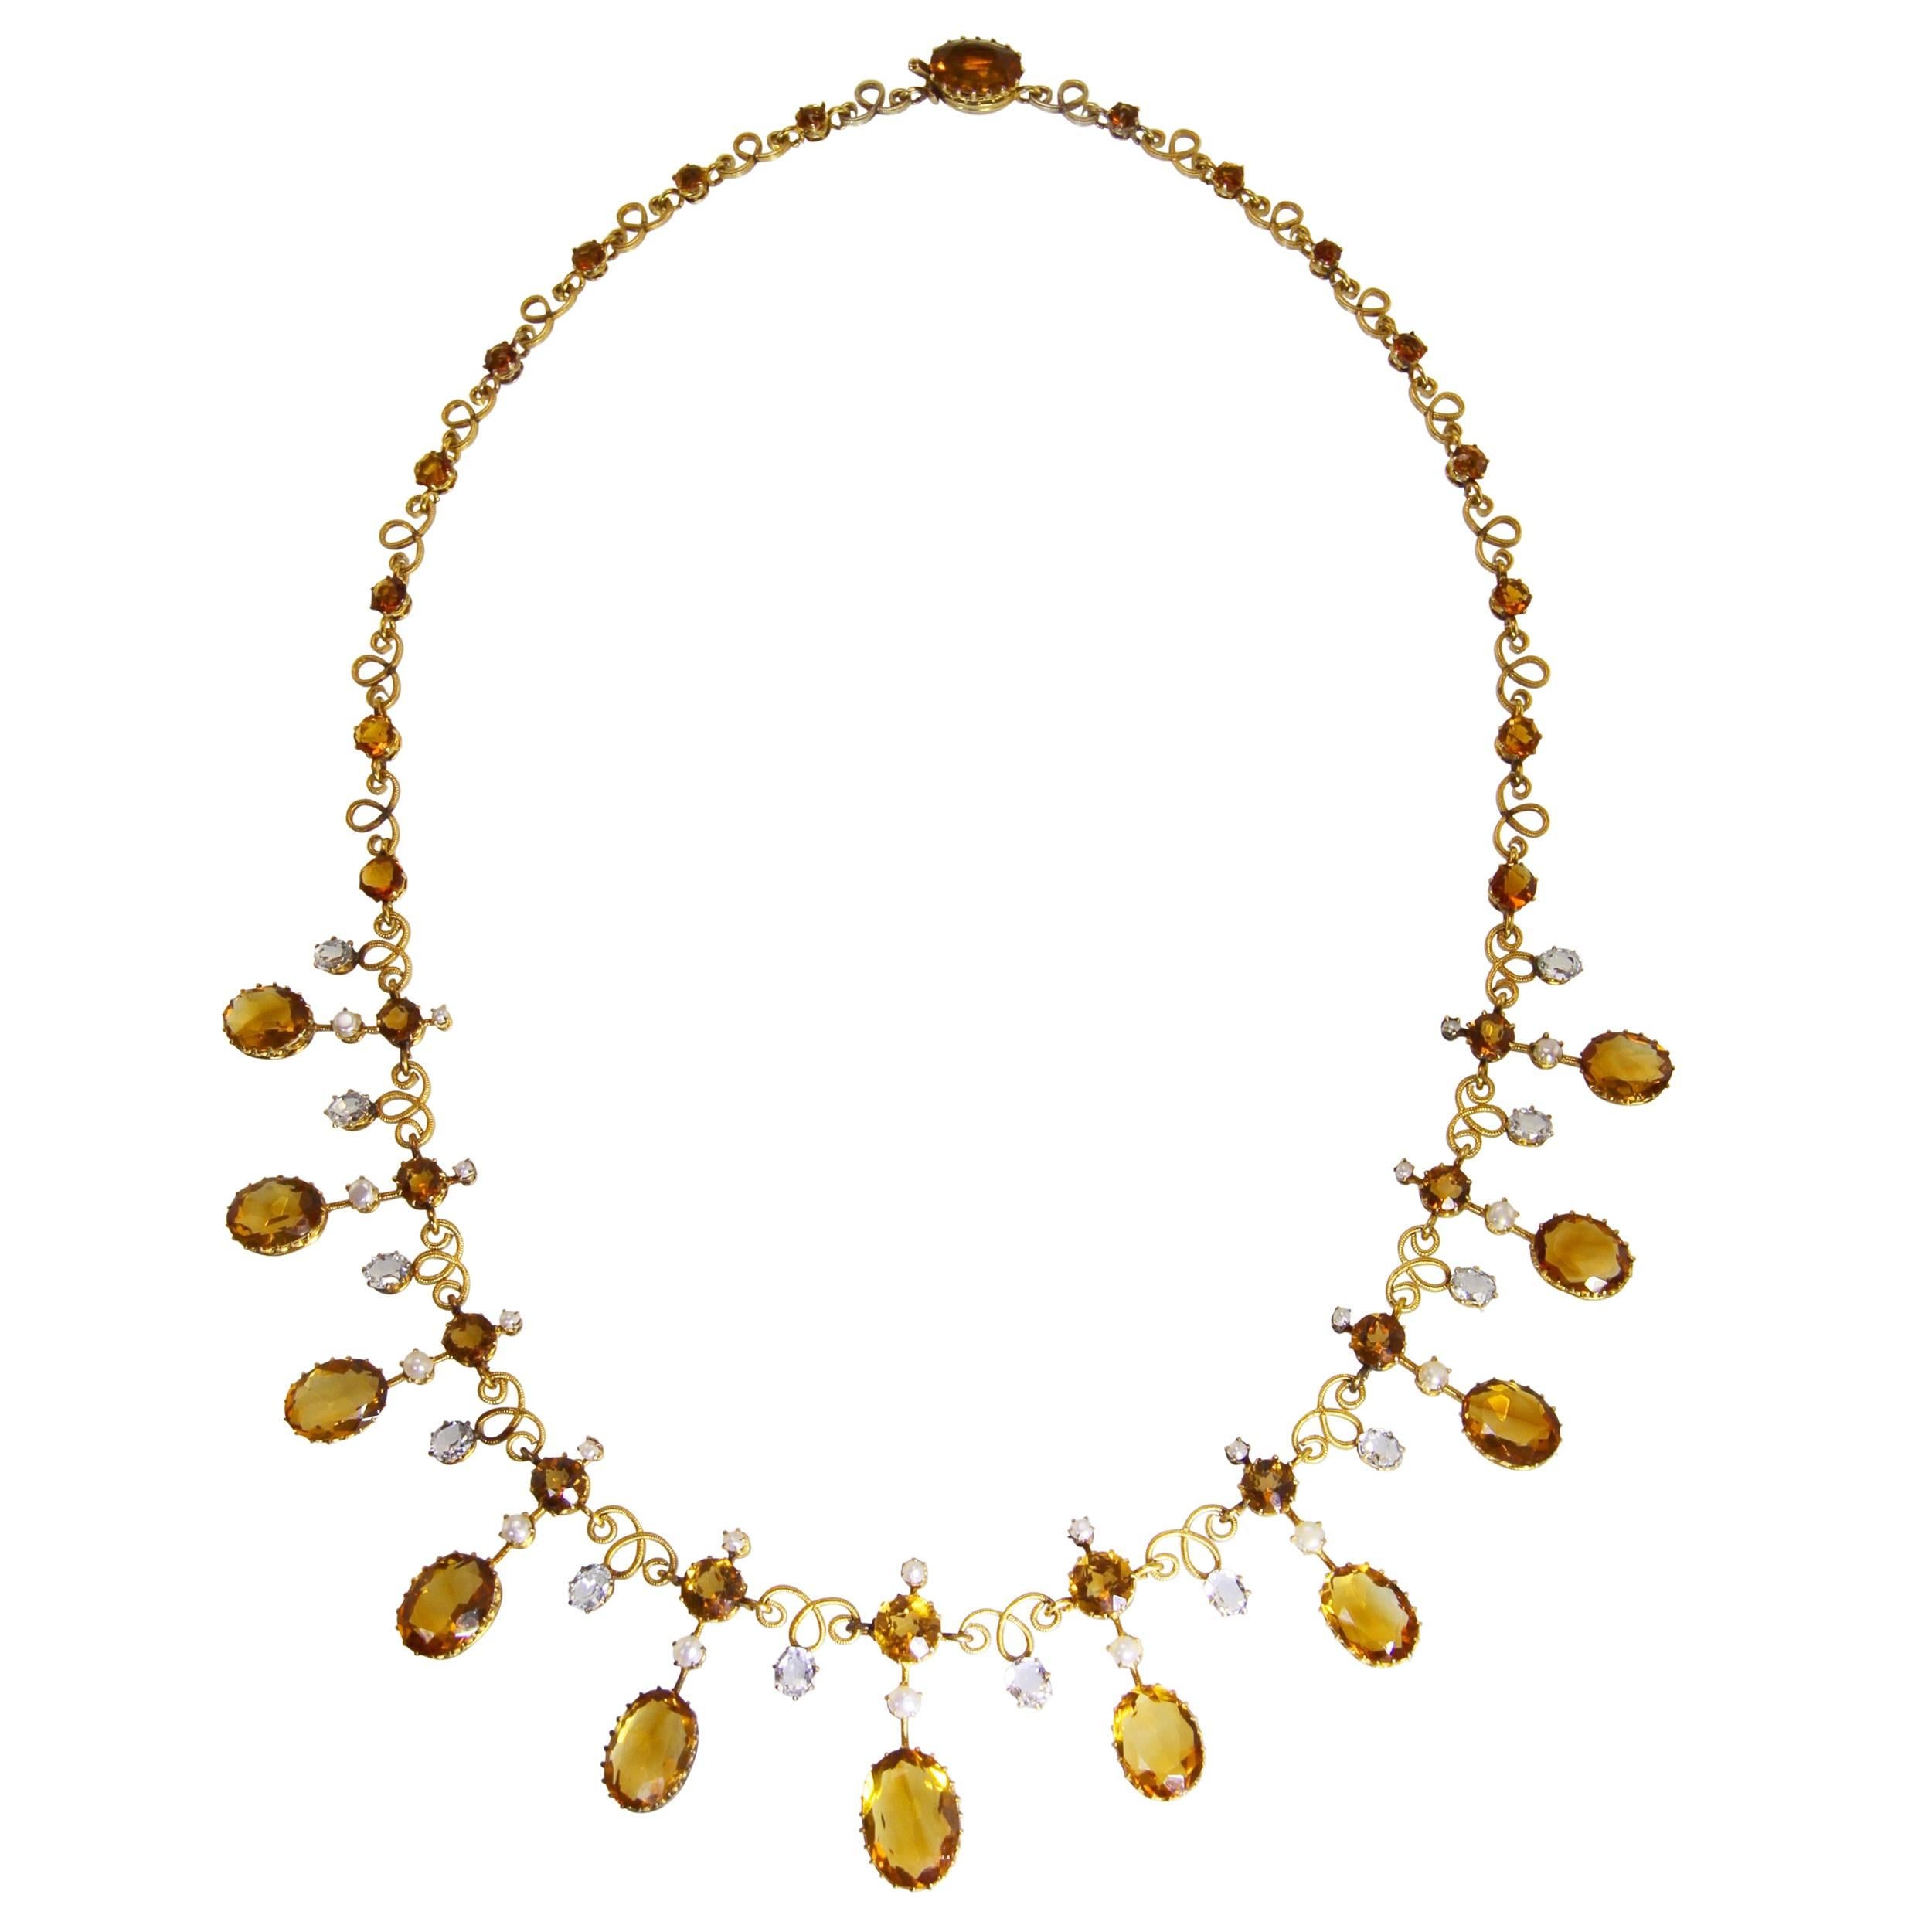 Antique Citrine White Sapphire Seed Pearl Gold Necklace